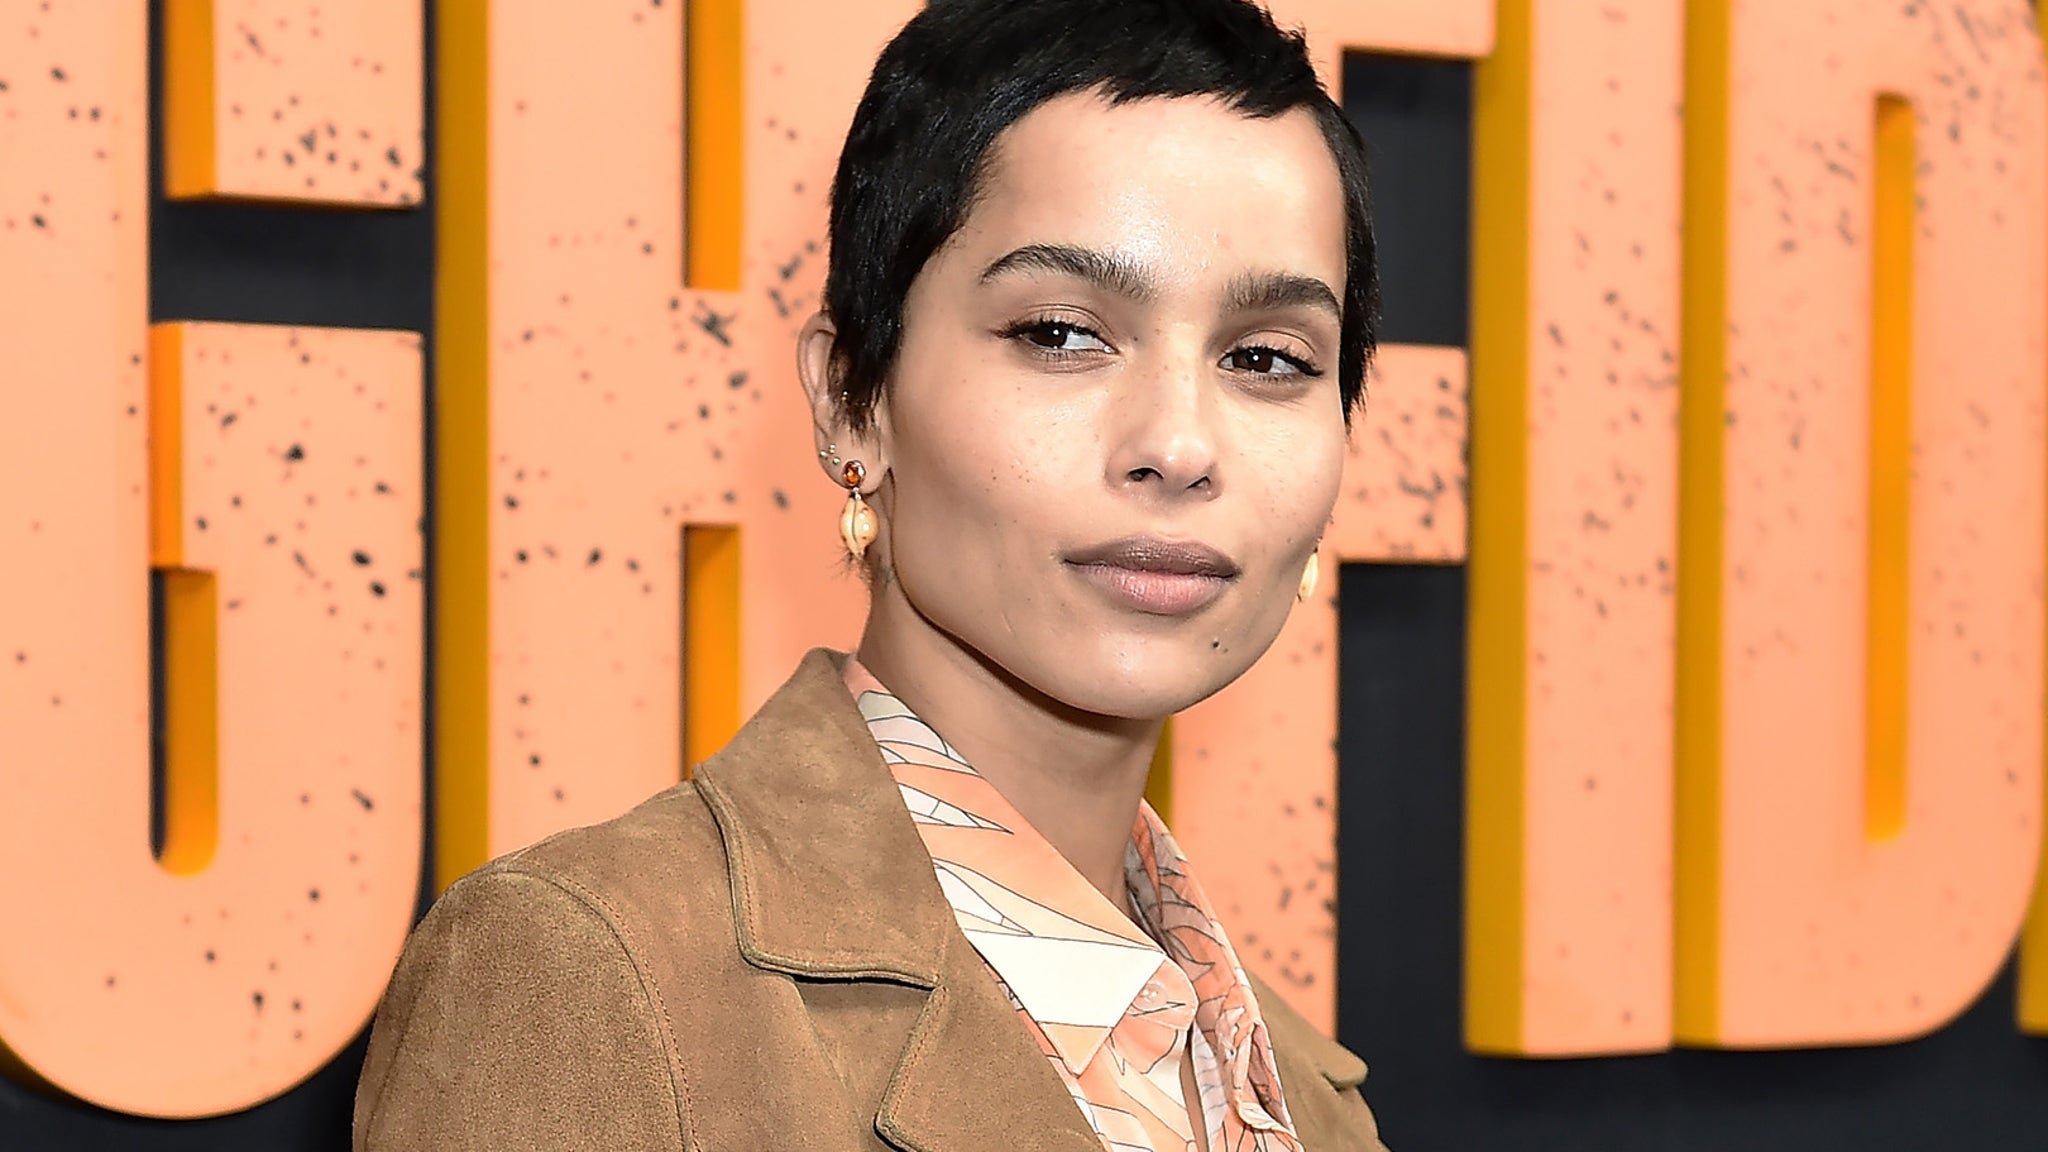 Zoe Kravitz Slams Hulu for Lack of Diversity Following High Fidelity Cancellation - TooFab